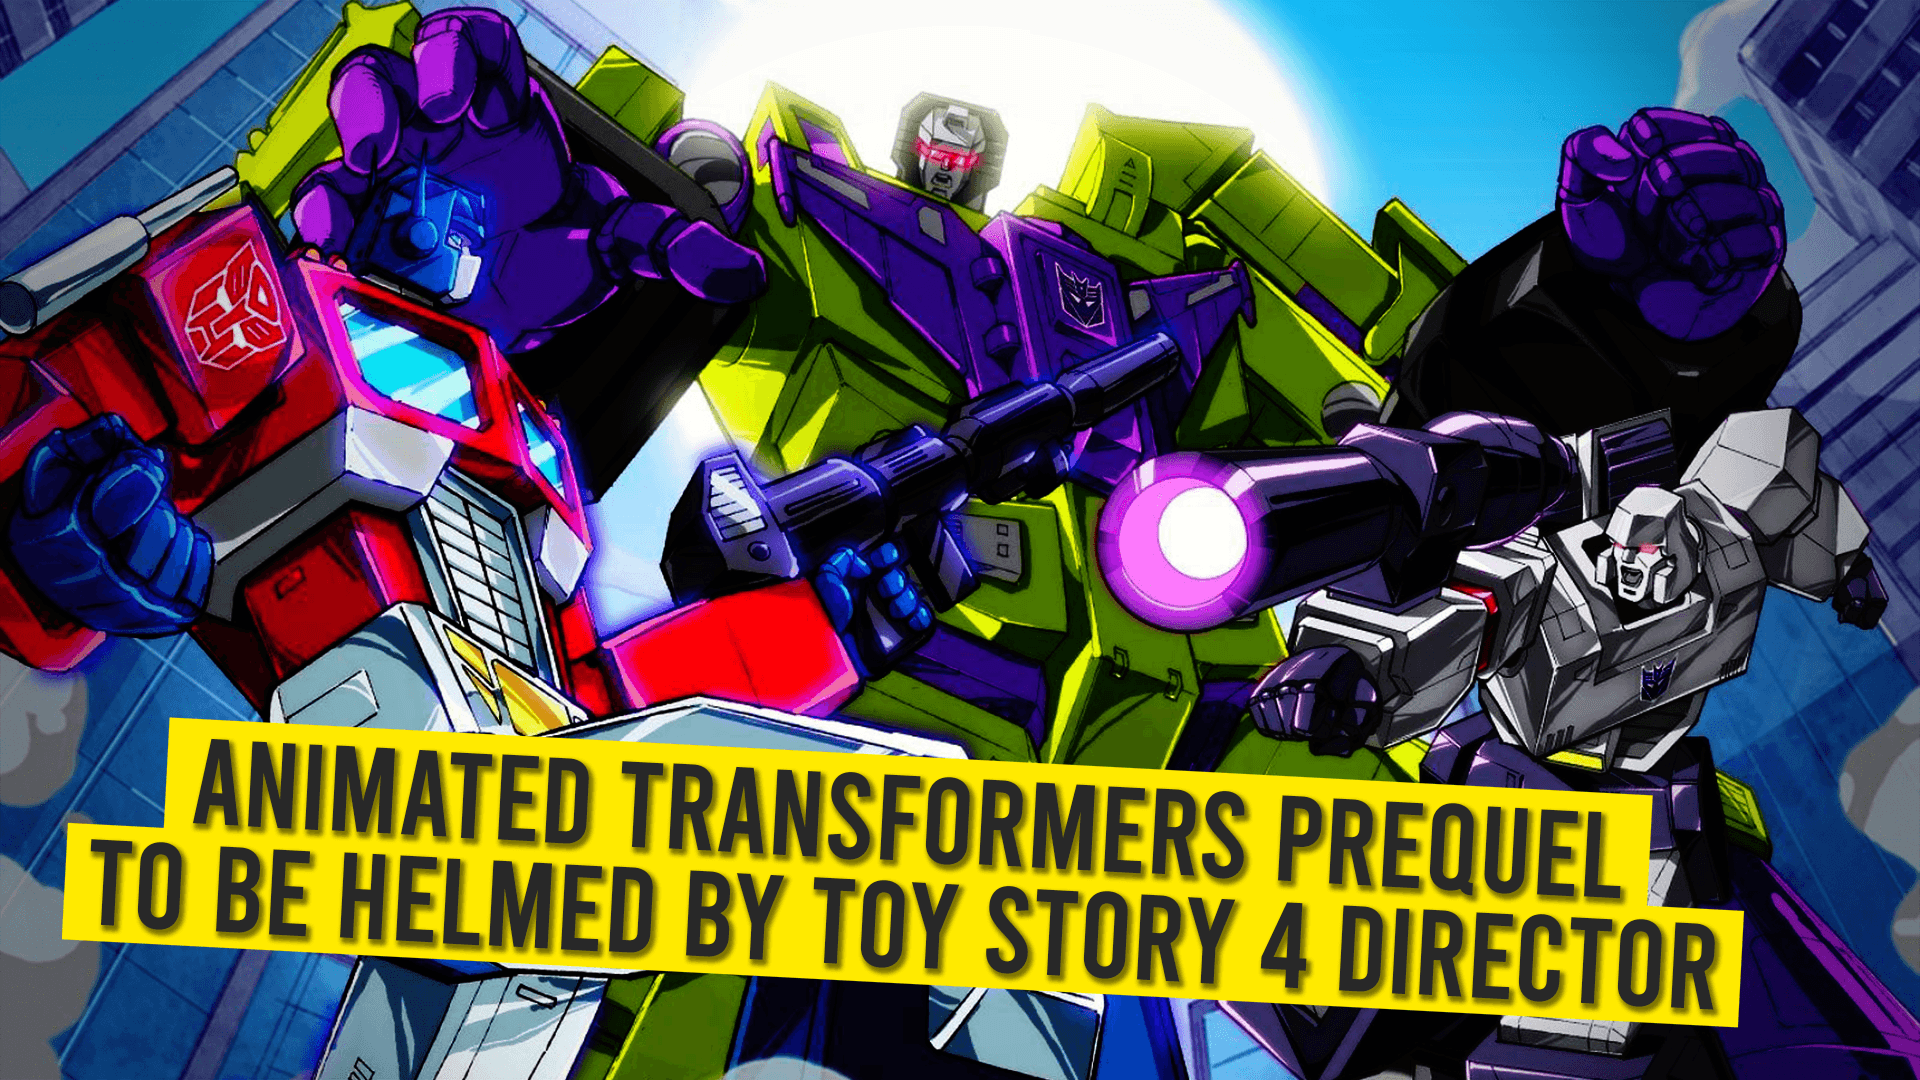 Animated Transformers Prequel To Be Helmed By Toy Story 4 Director